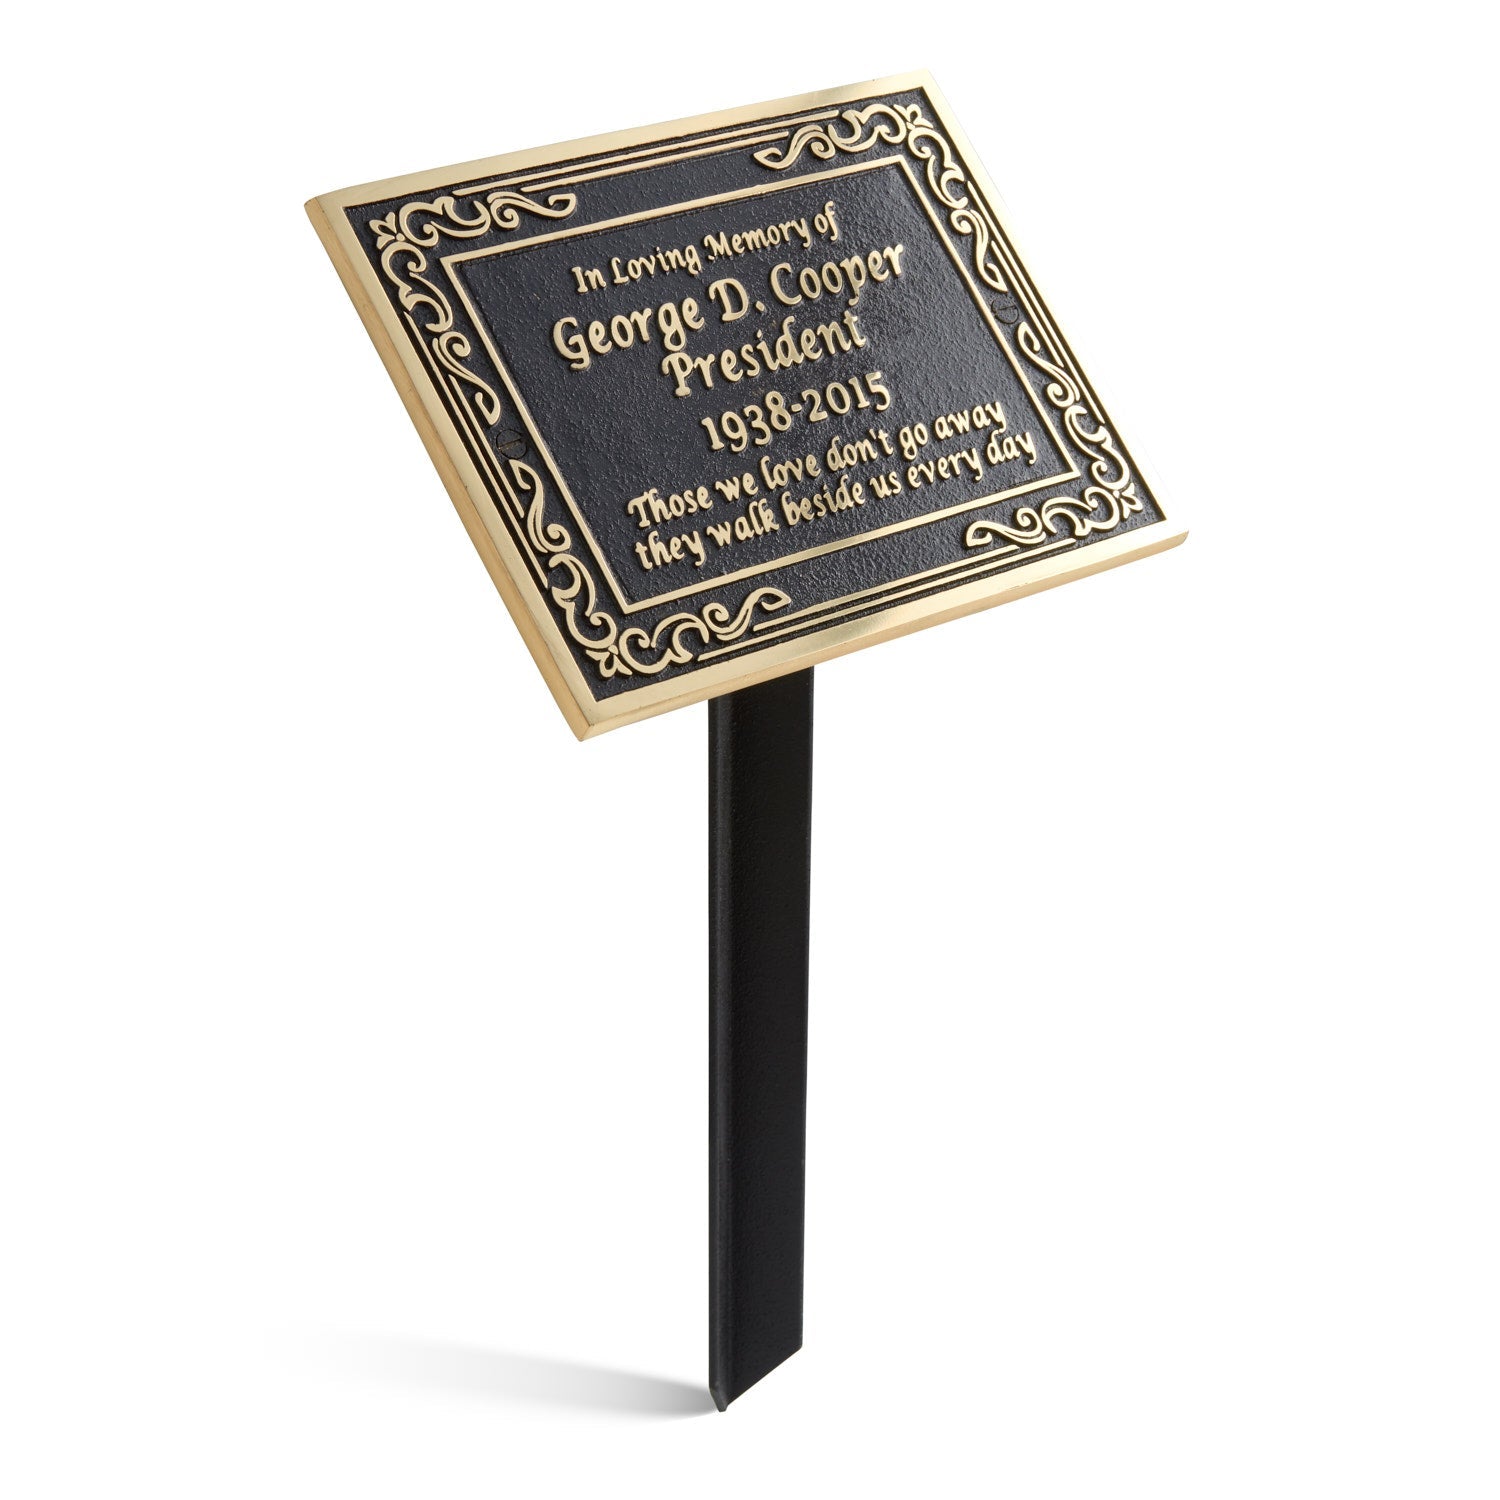 Ground Stake / Plaque Stand for Memorials - The Metal Foundry